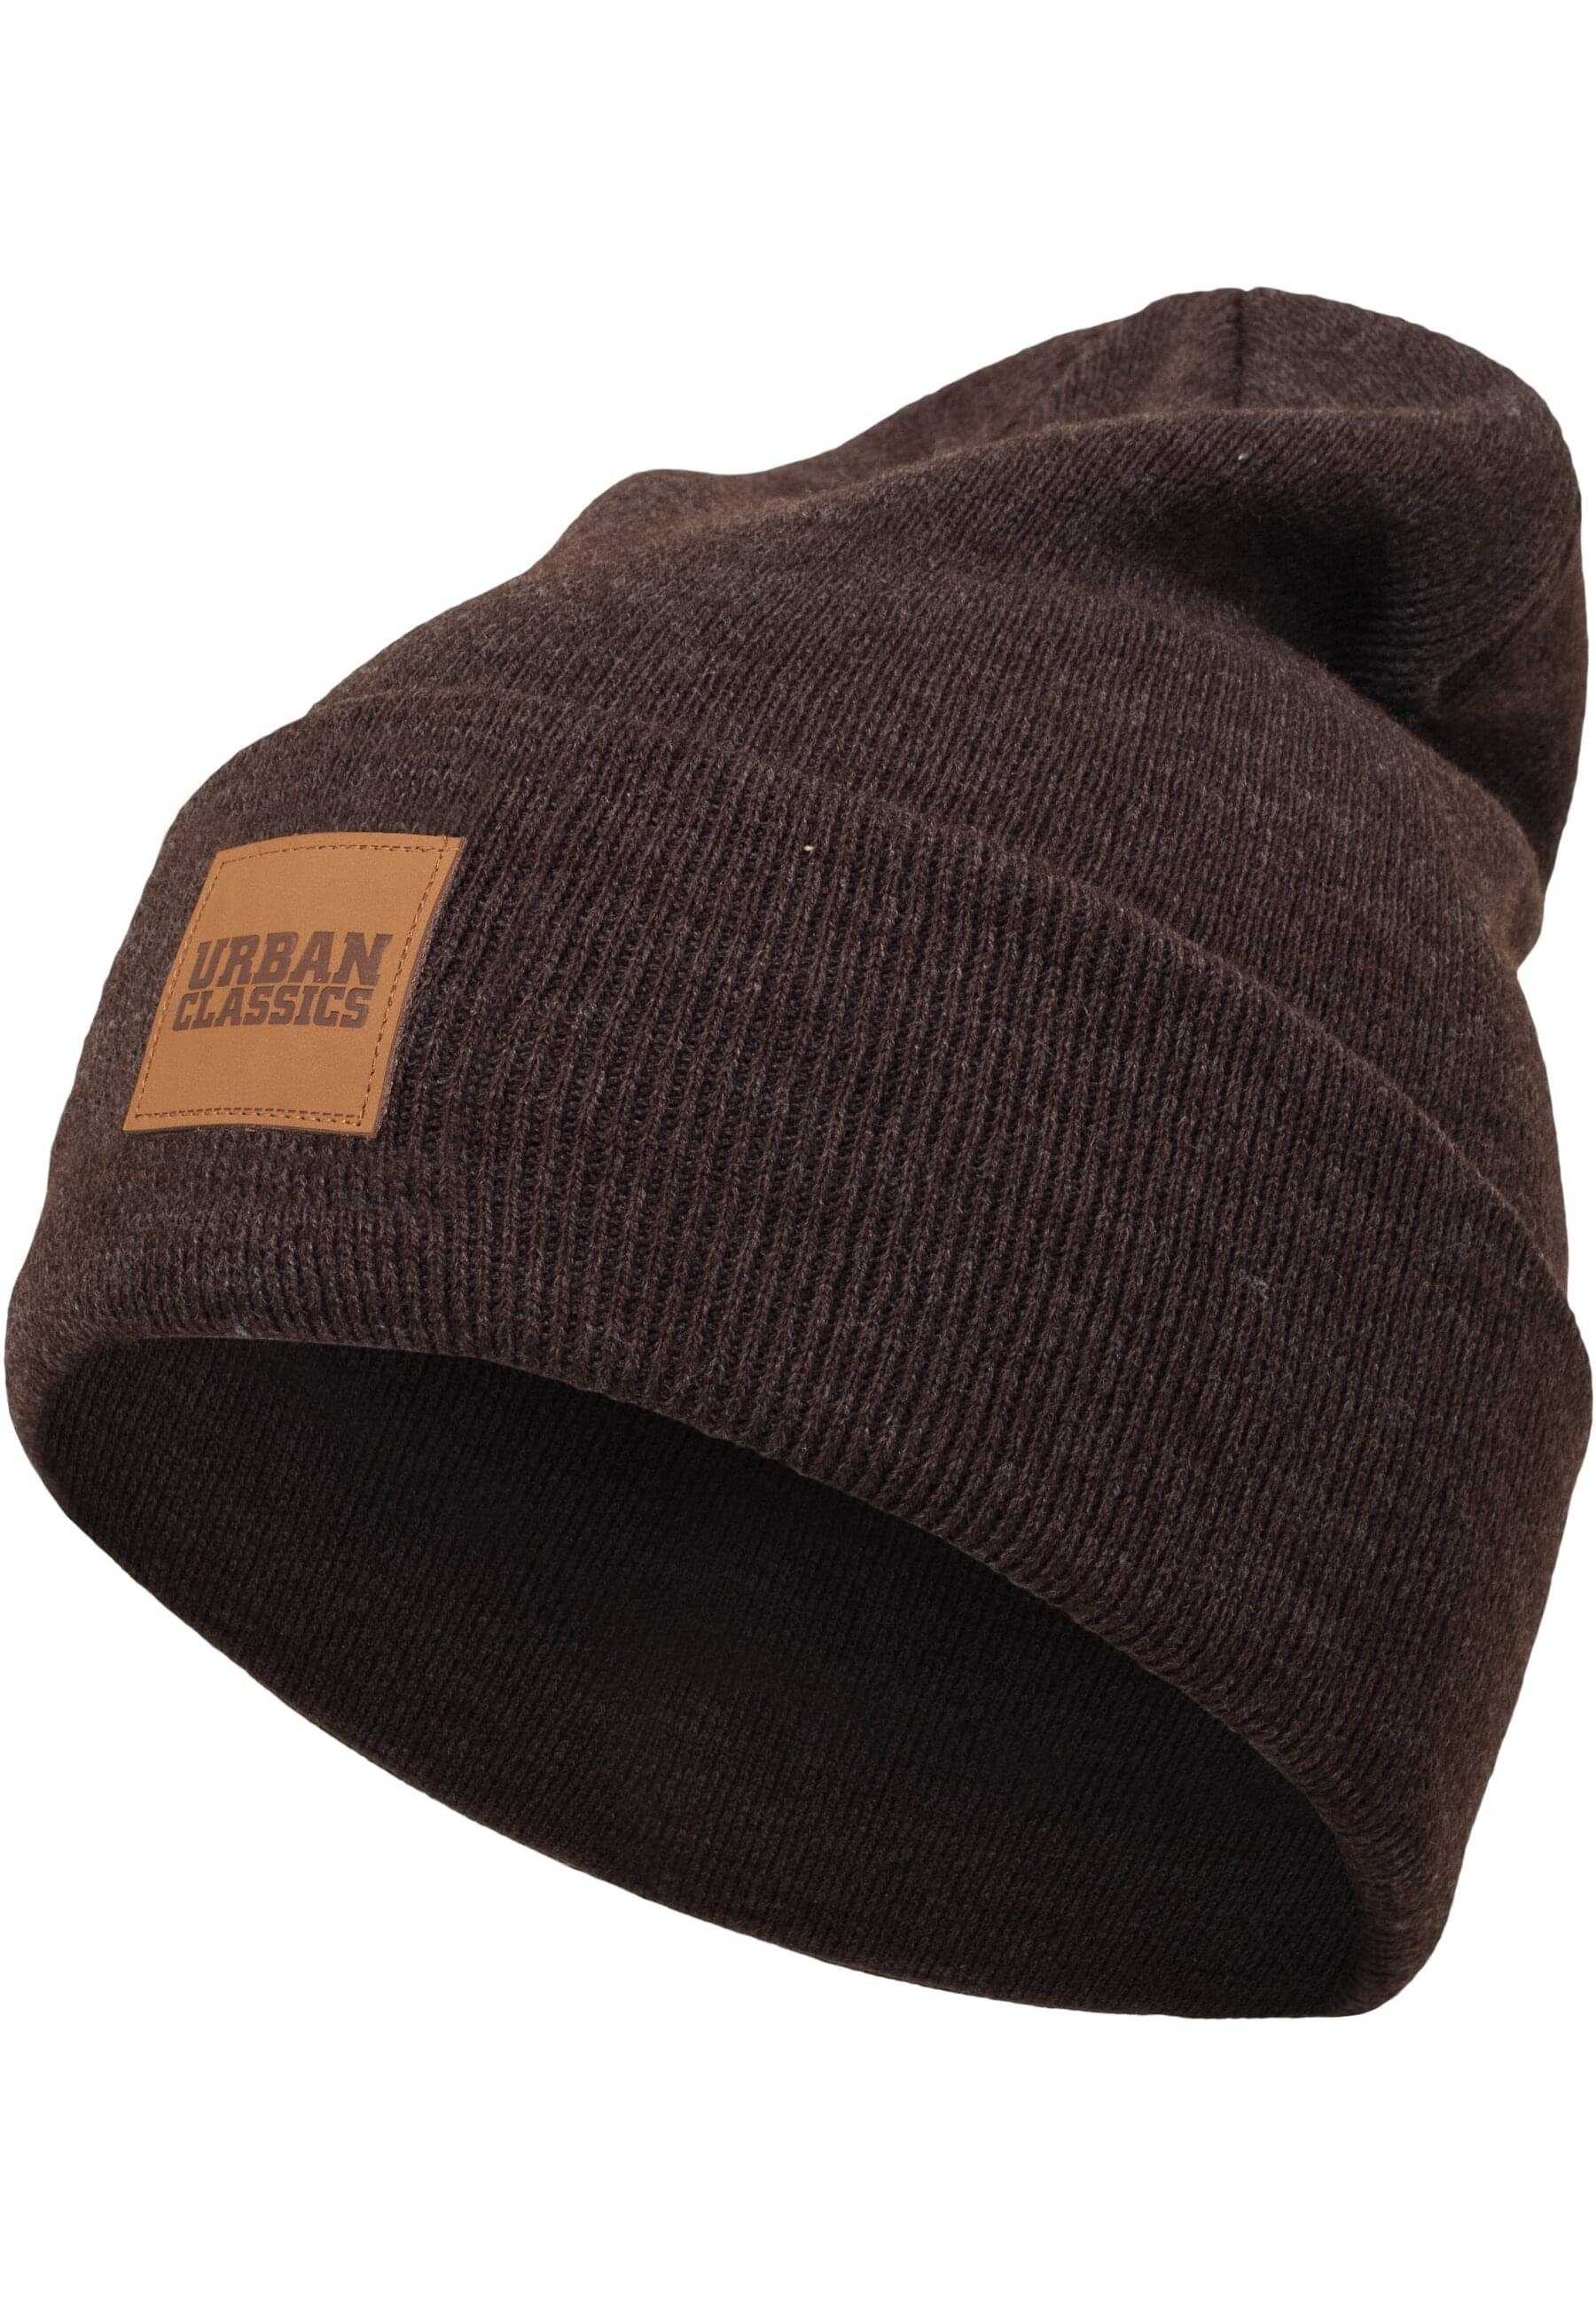 URBAN CLASSICS Beanie Unisex (1-St) Beanie Synthetic Leatherpatch heatherbrown Long